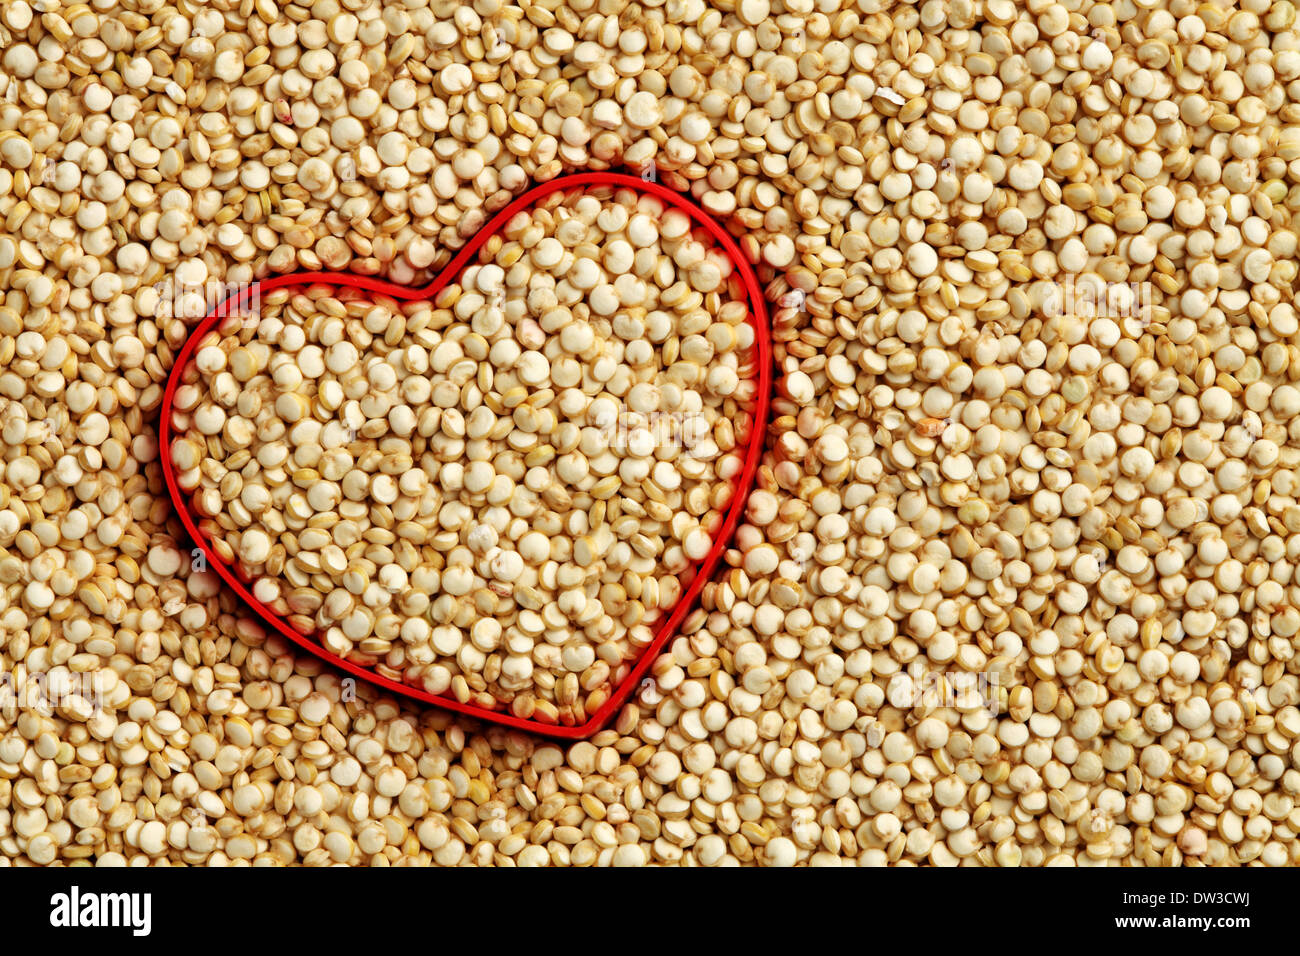 Red heart shape on uncooked quinoa background Stock Photo